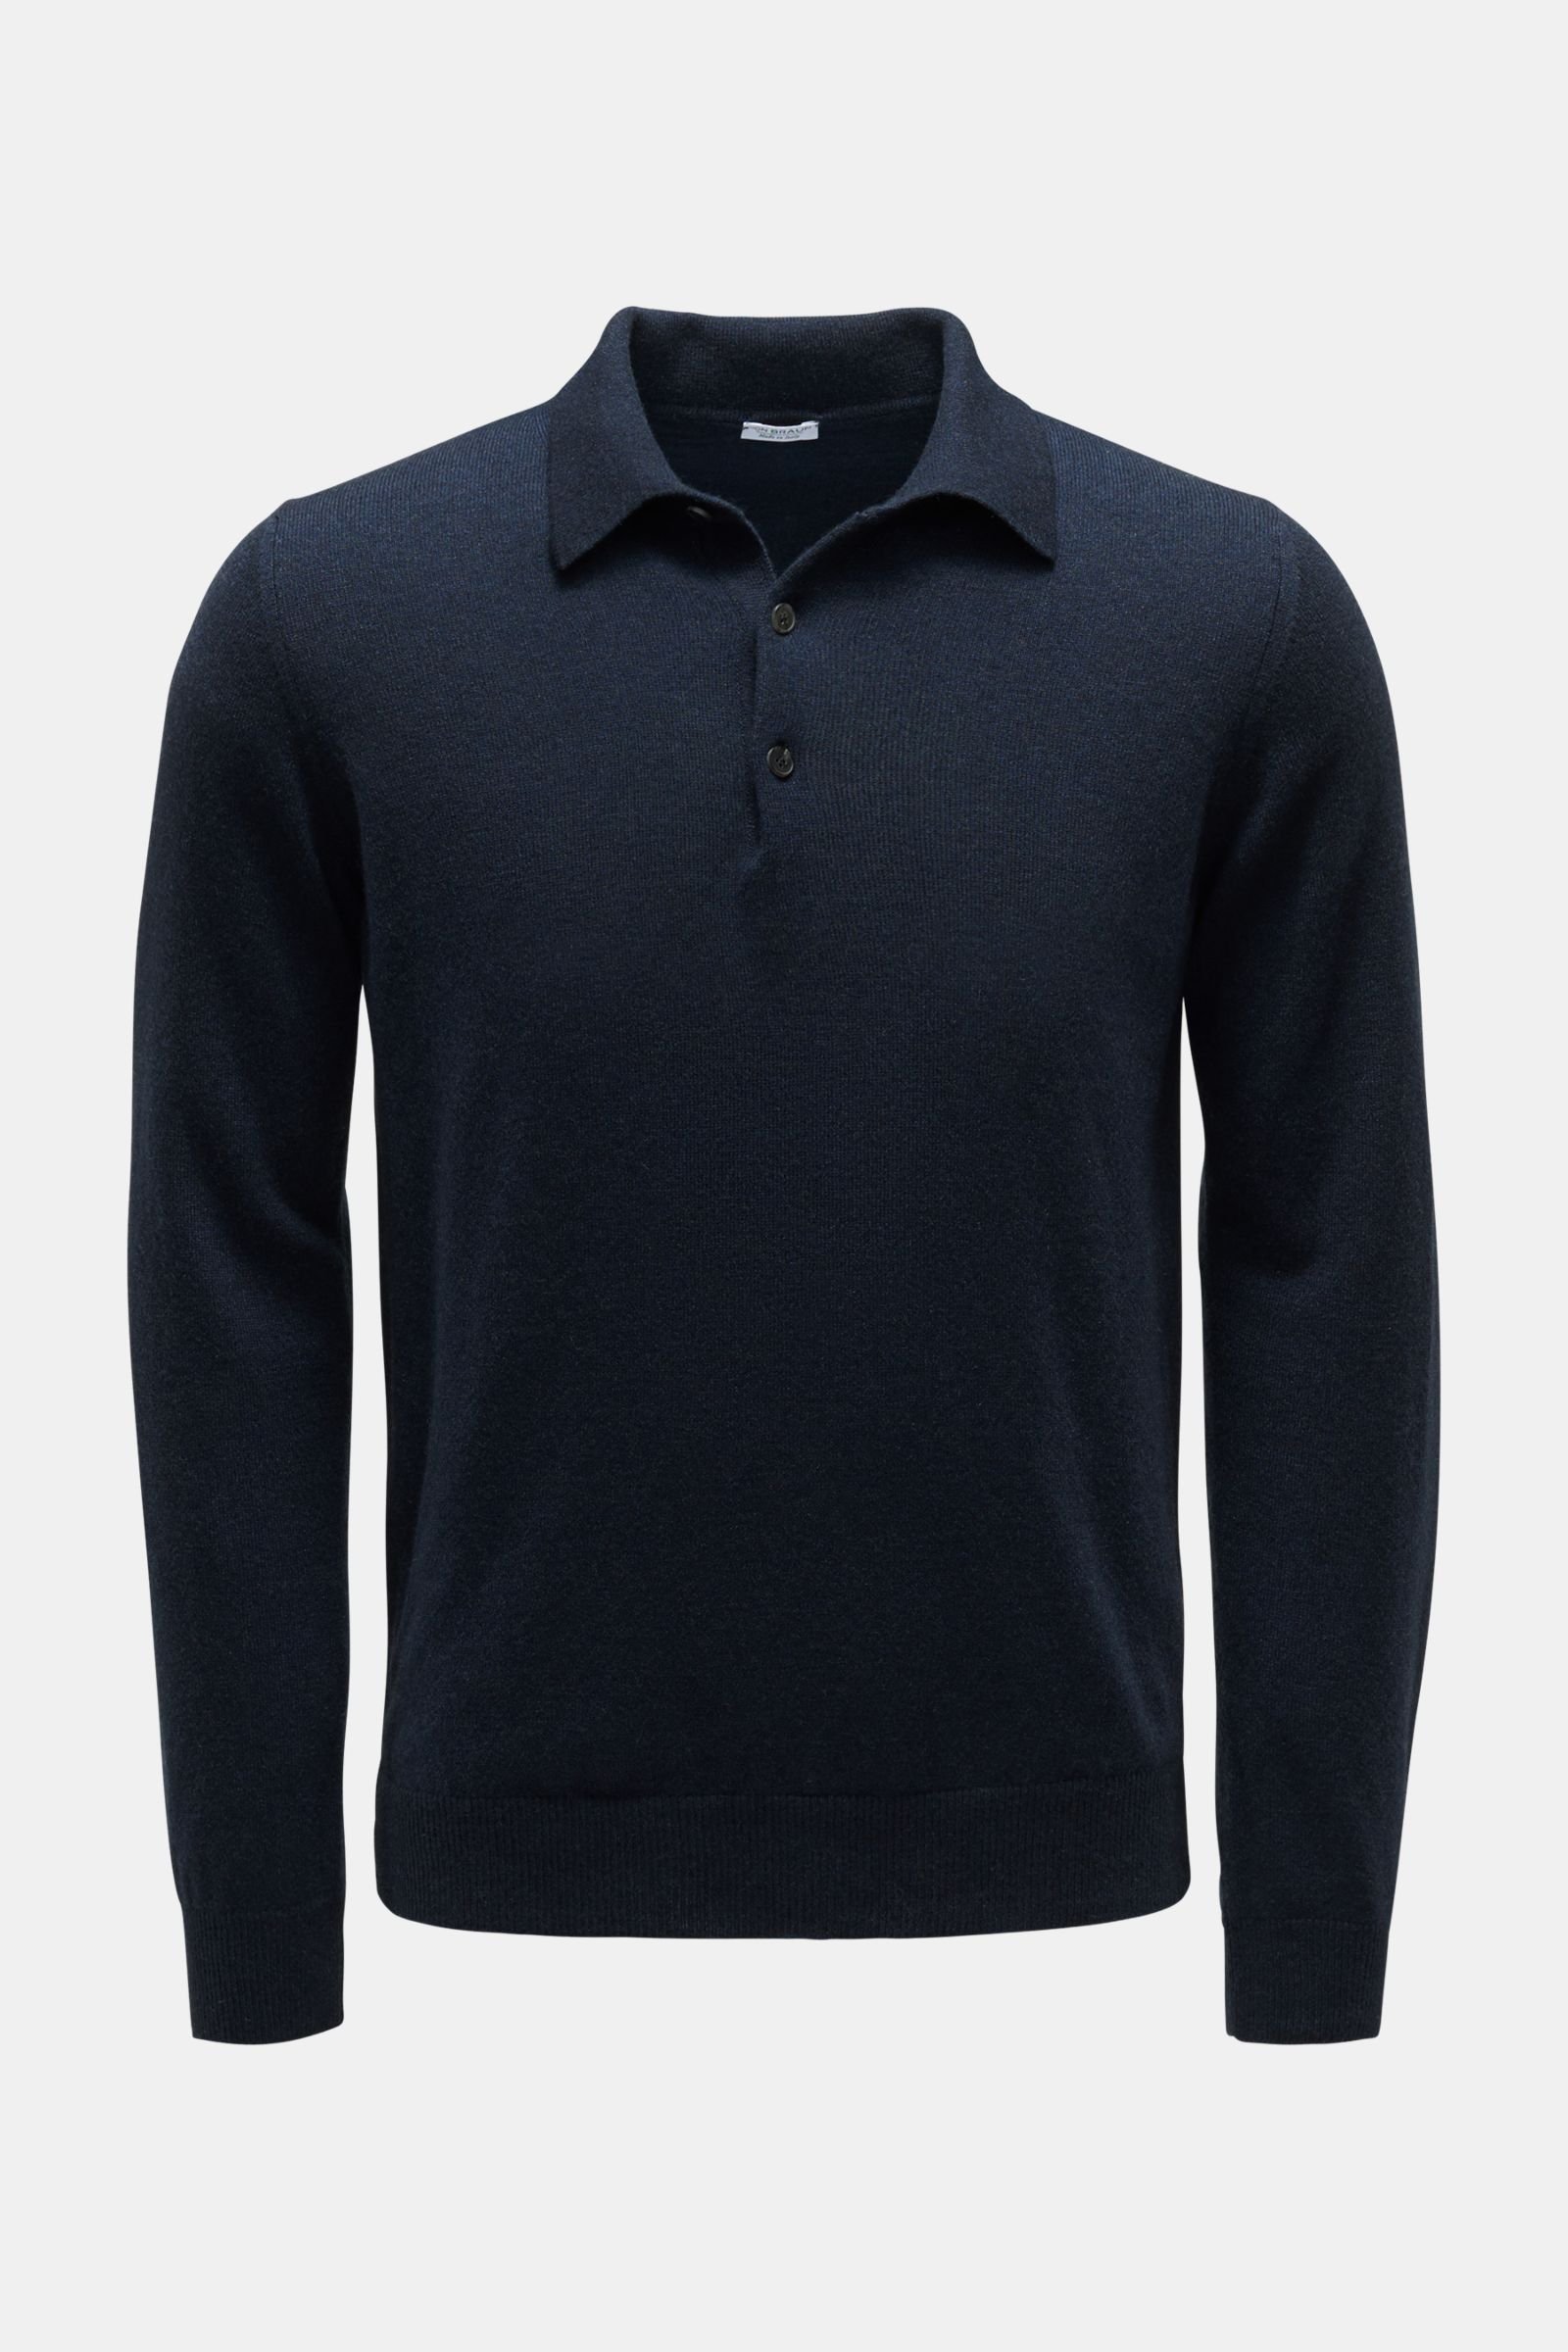 Cashmere knit polo teal